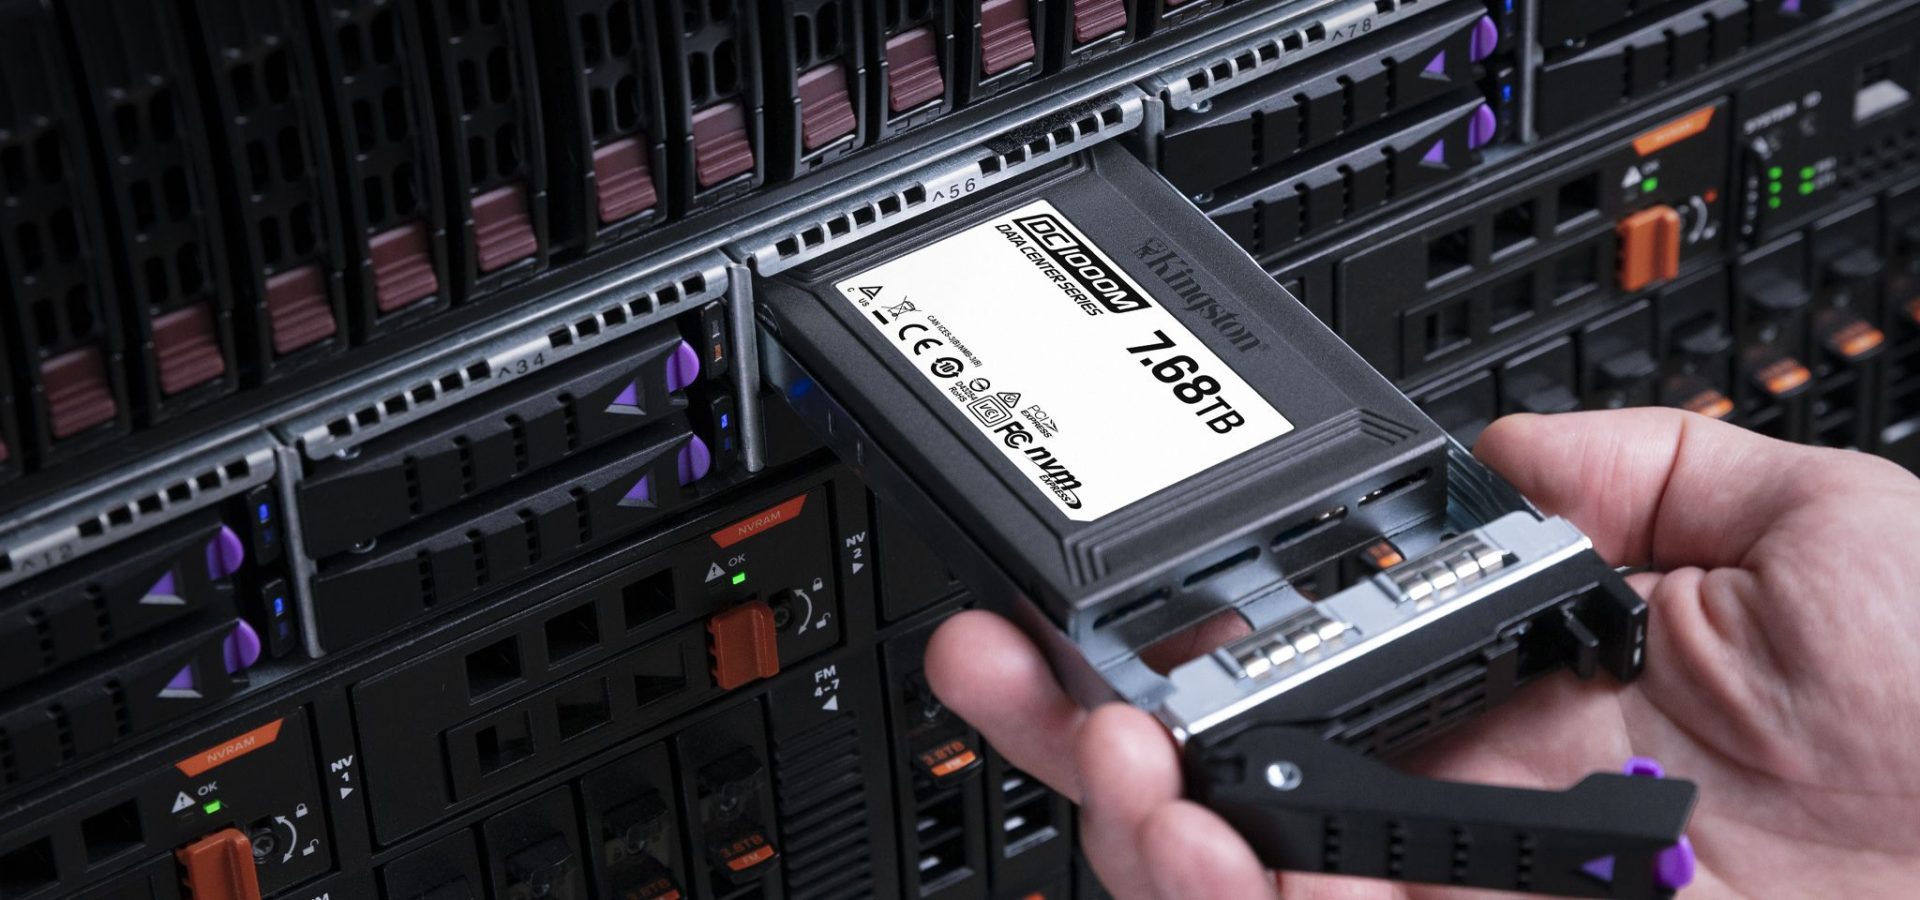 Releases Enterprise-Grade Data Center NVMe SSD for Mixed-Use - The